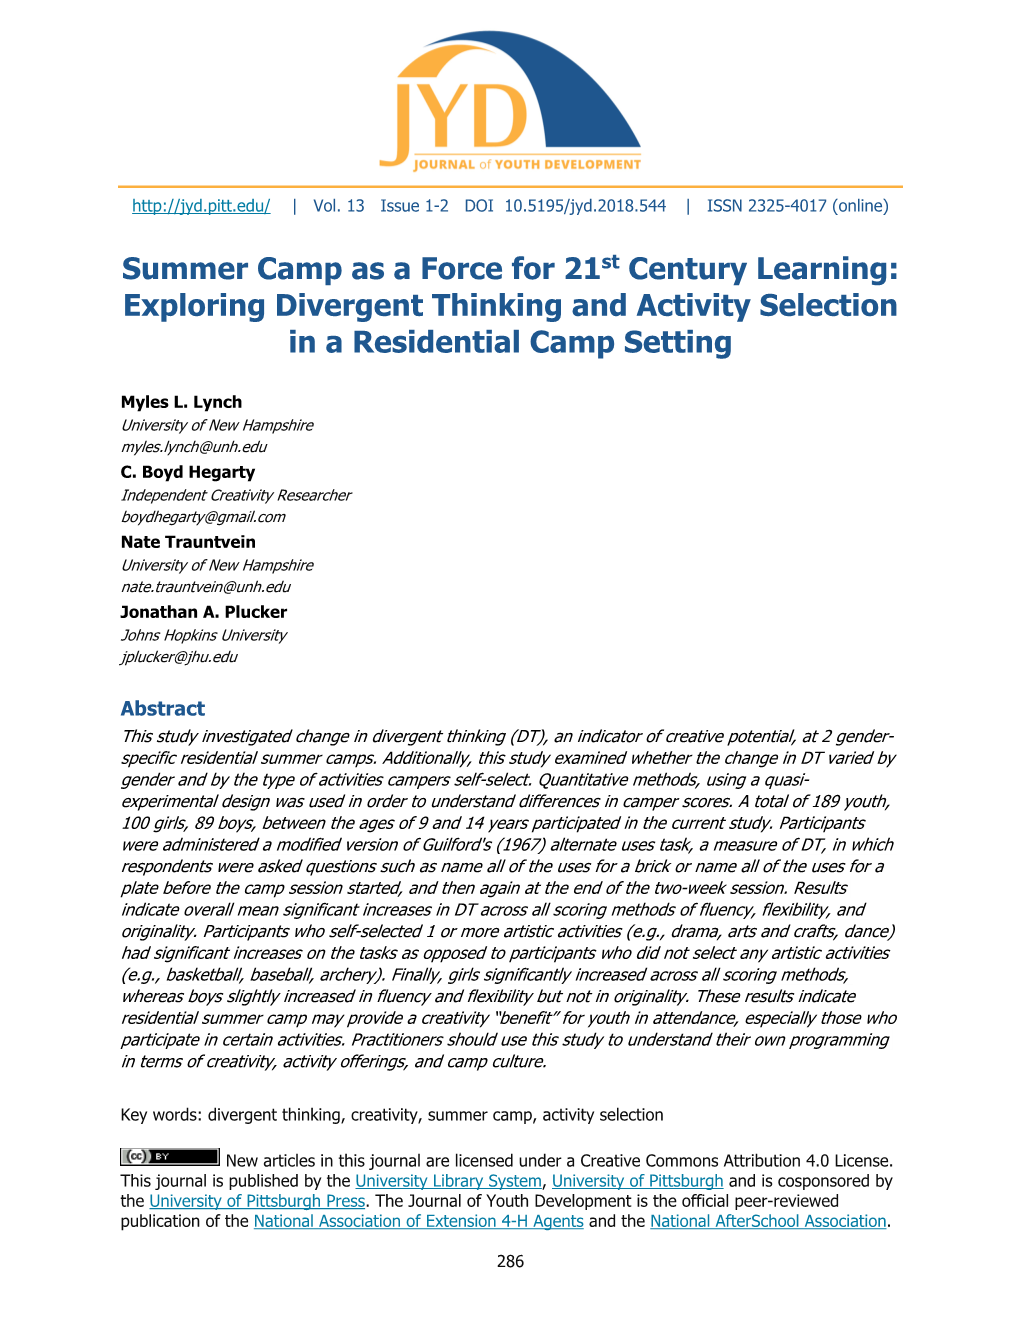 Summer Camp As a Force for 21St Century Learning: Exploring Divergent Thinking and Activity Selection in a Residential Camp Setting